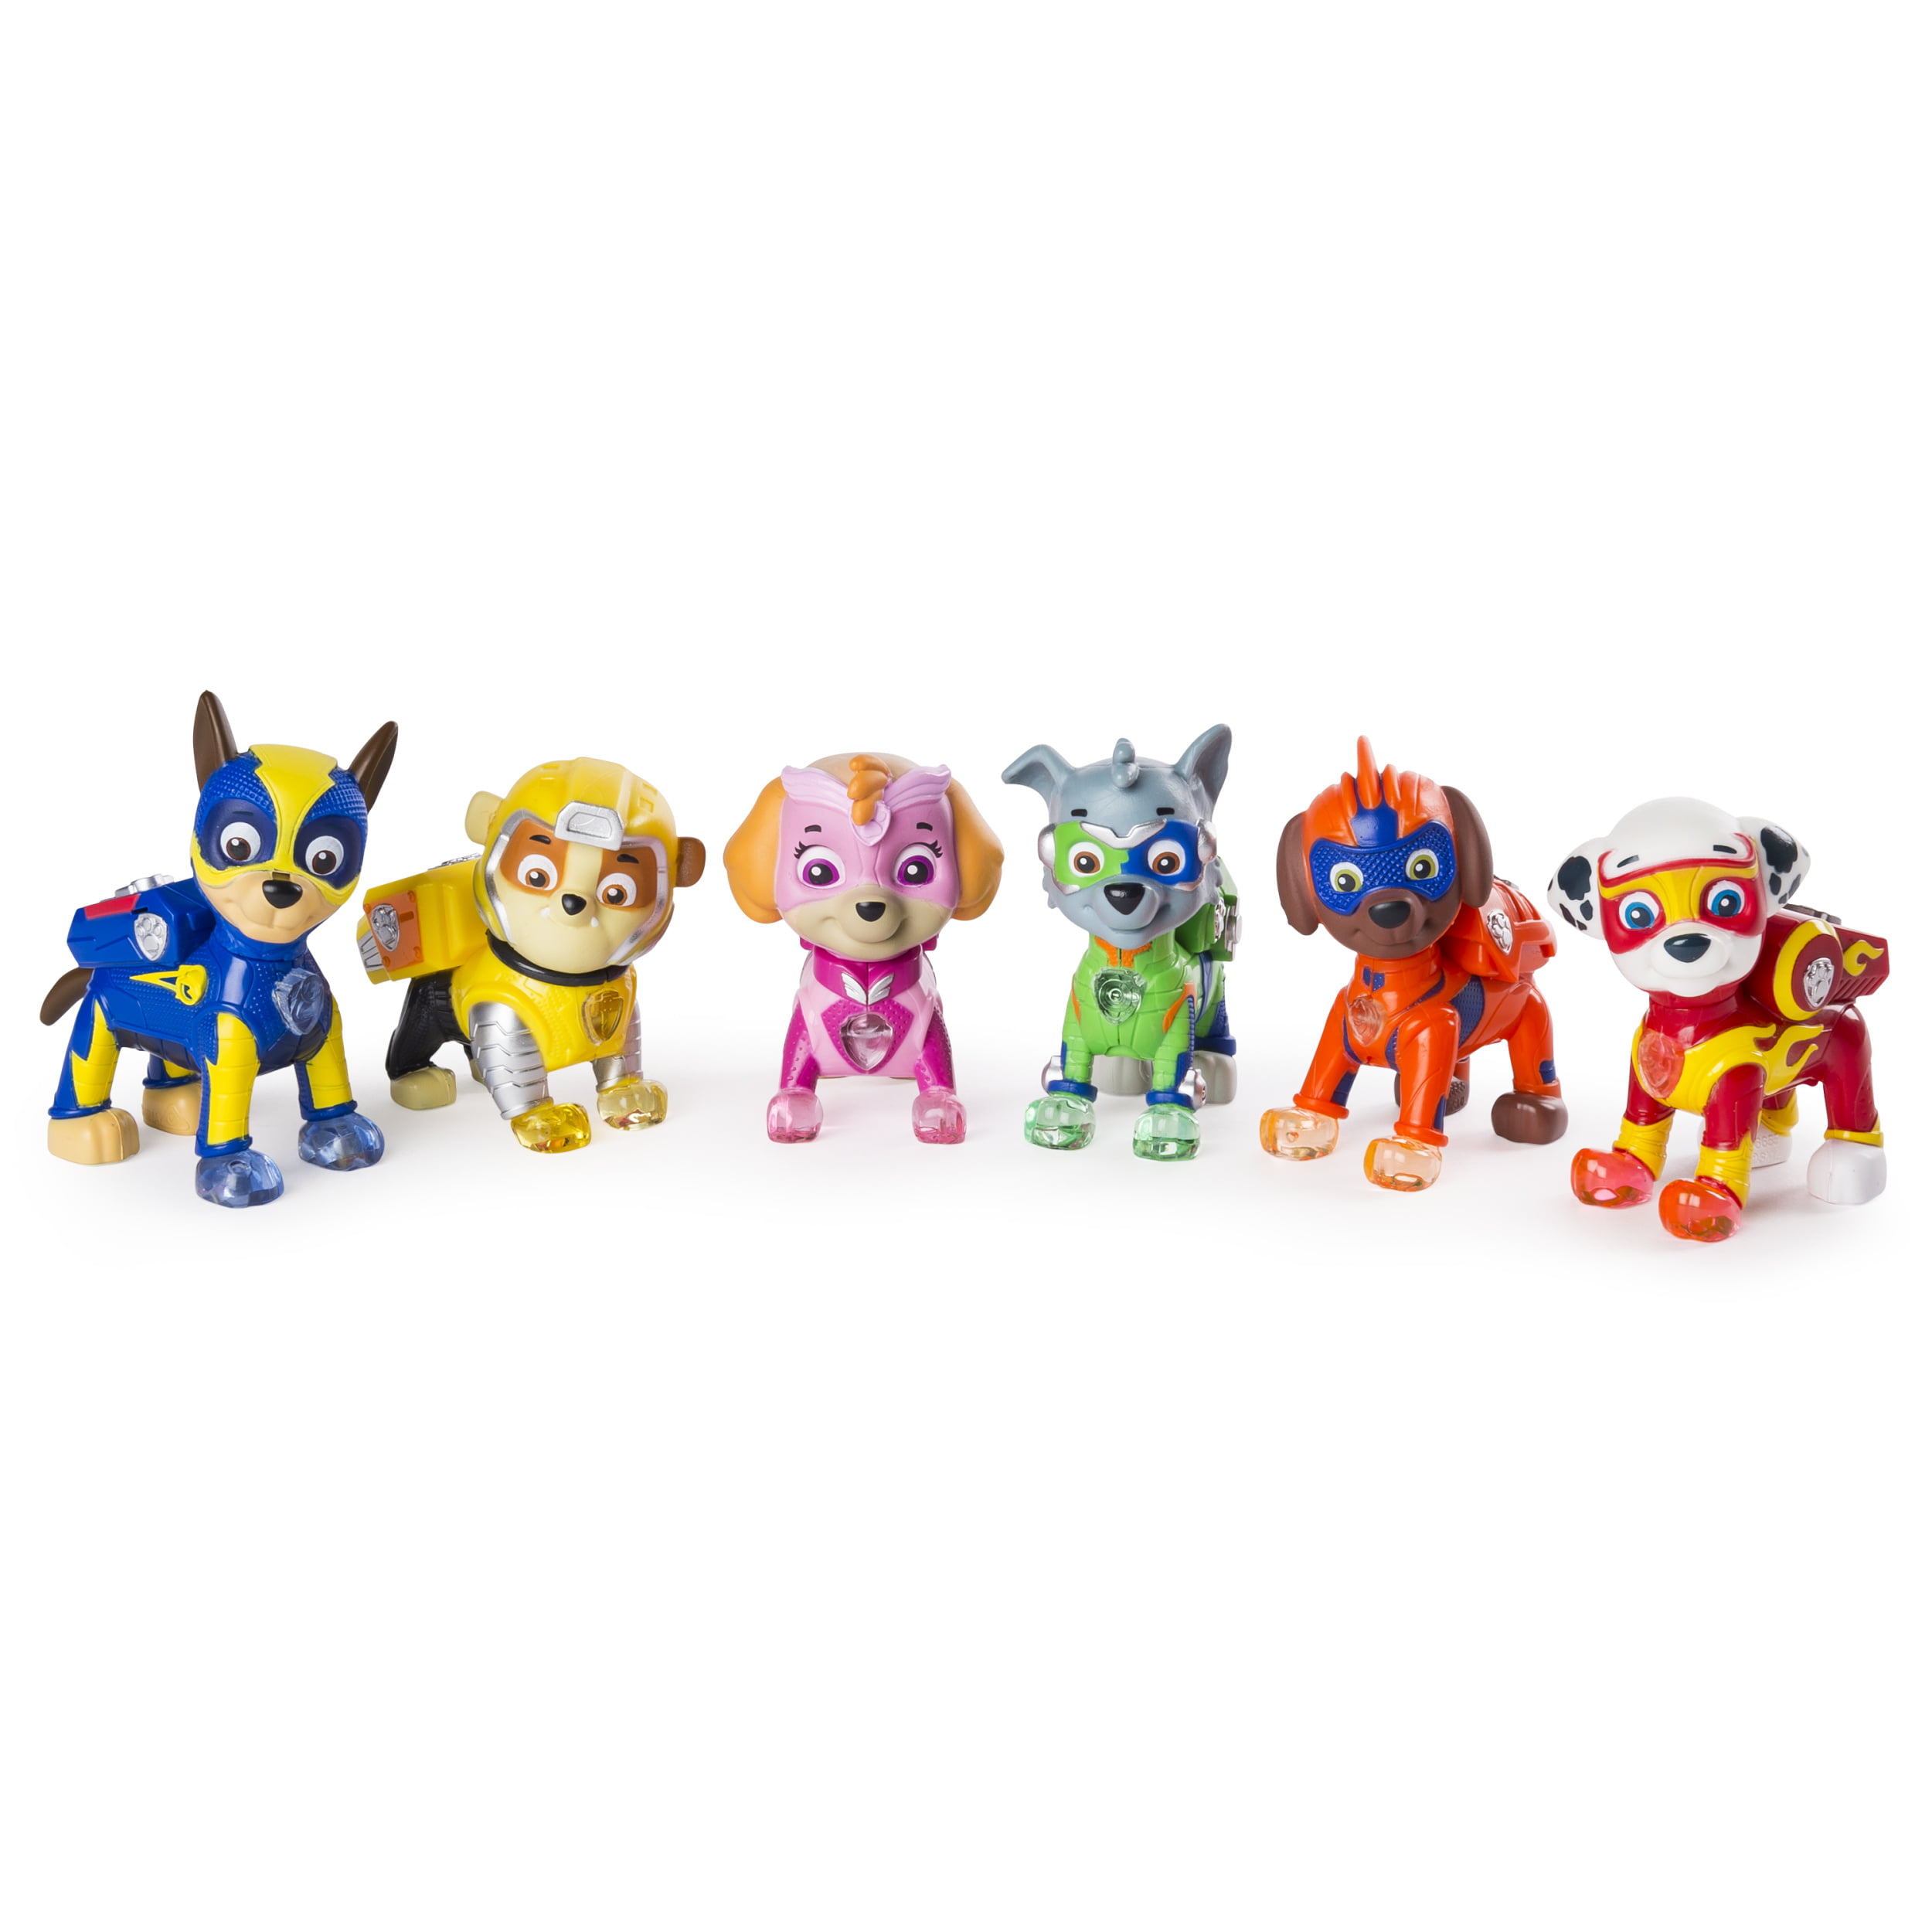 PAW Patrol - Mighty Pups 6-Pack Gift Set, PAW Patrol Figures with ...